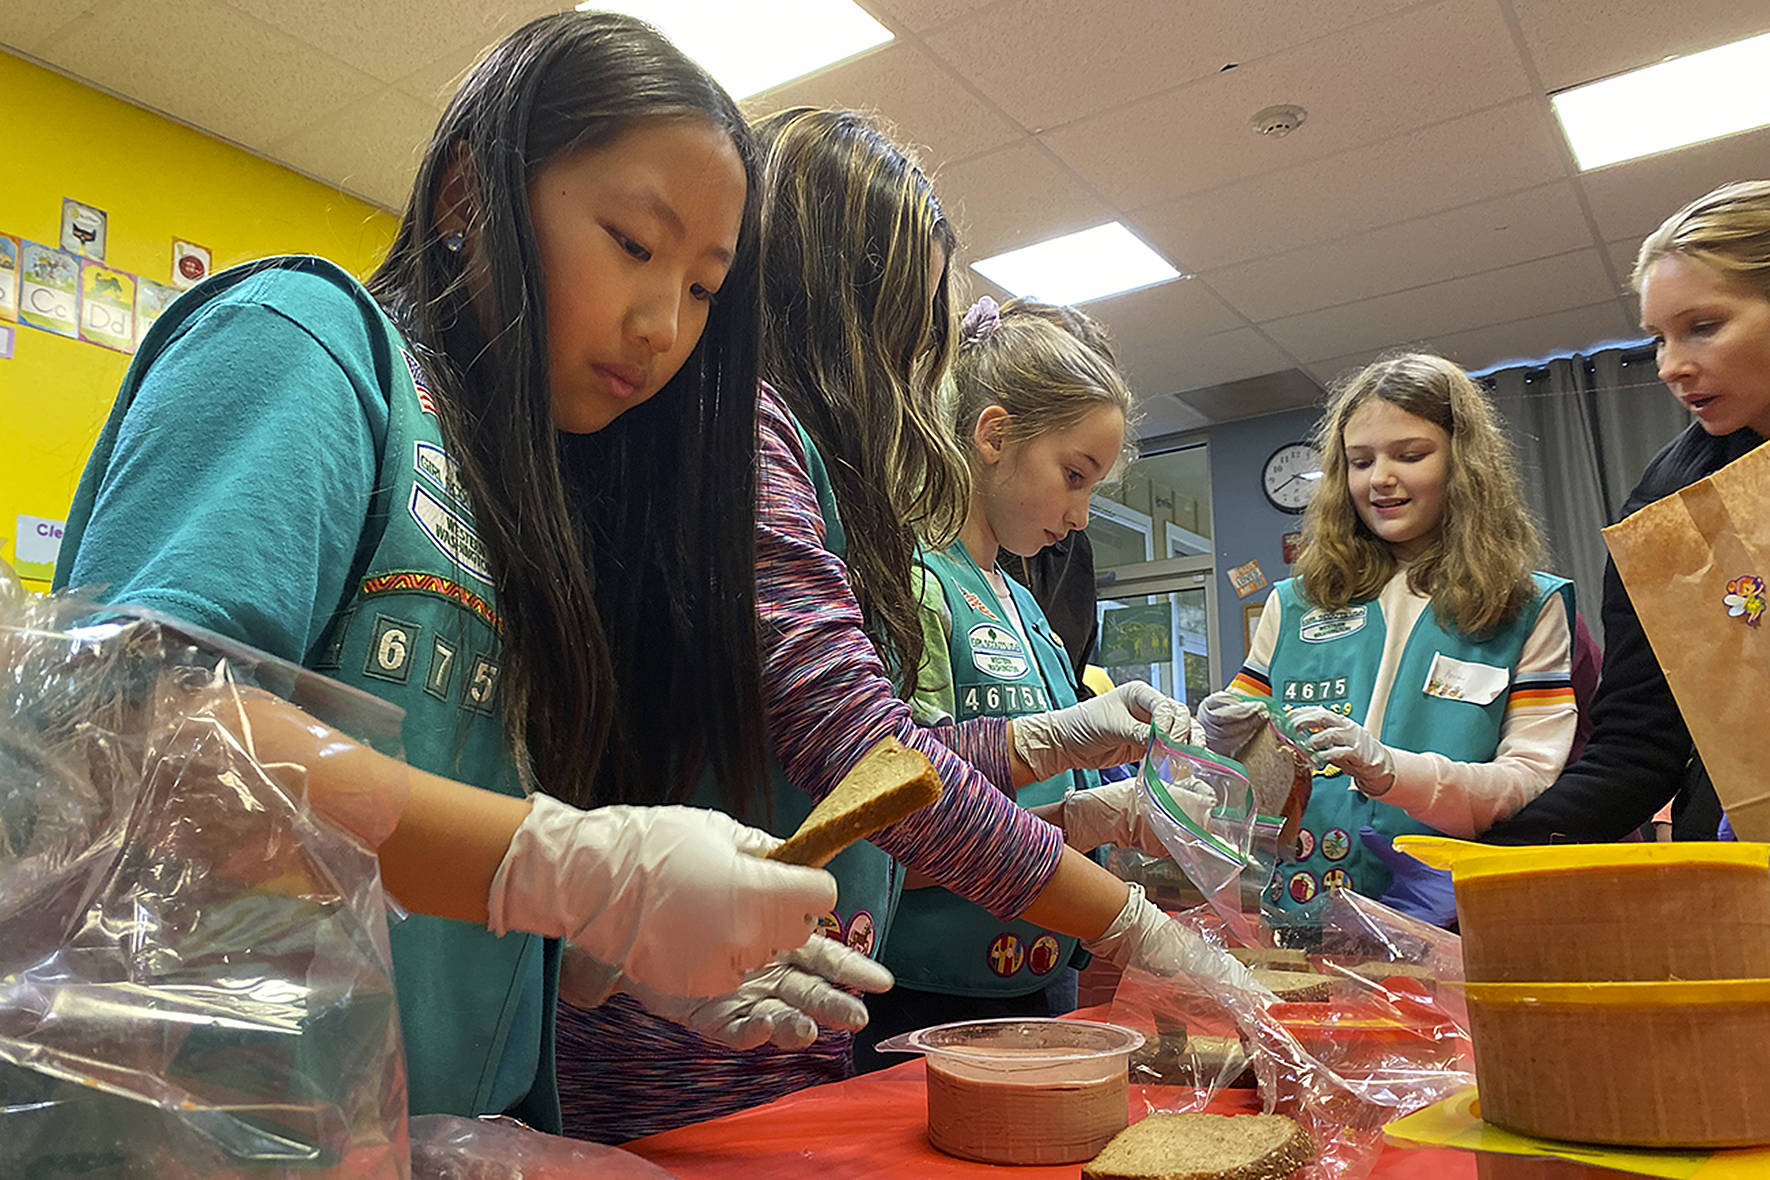 Photo by Haley Ausbun. Girl Scouts from troops 46754, 41126 and 41170 put together 400 sandwhich lunches on Saturday, Nov. 9 as part of Vision House “kids serve” event. The lunches then went to people experiencing homelessness in Seattle via Union Gospel Mission Search and Rescue.